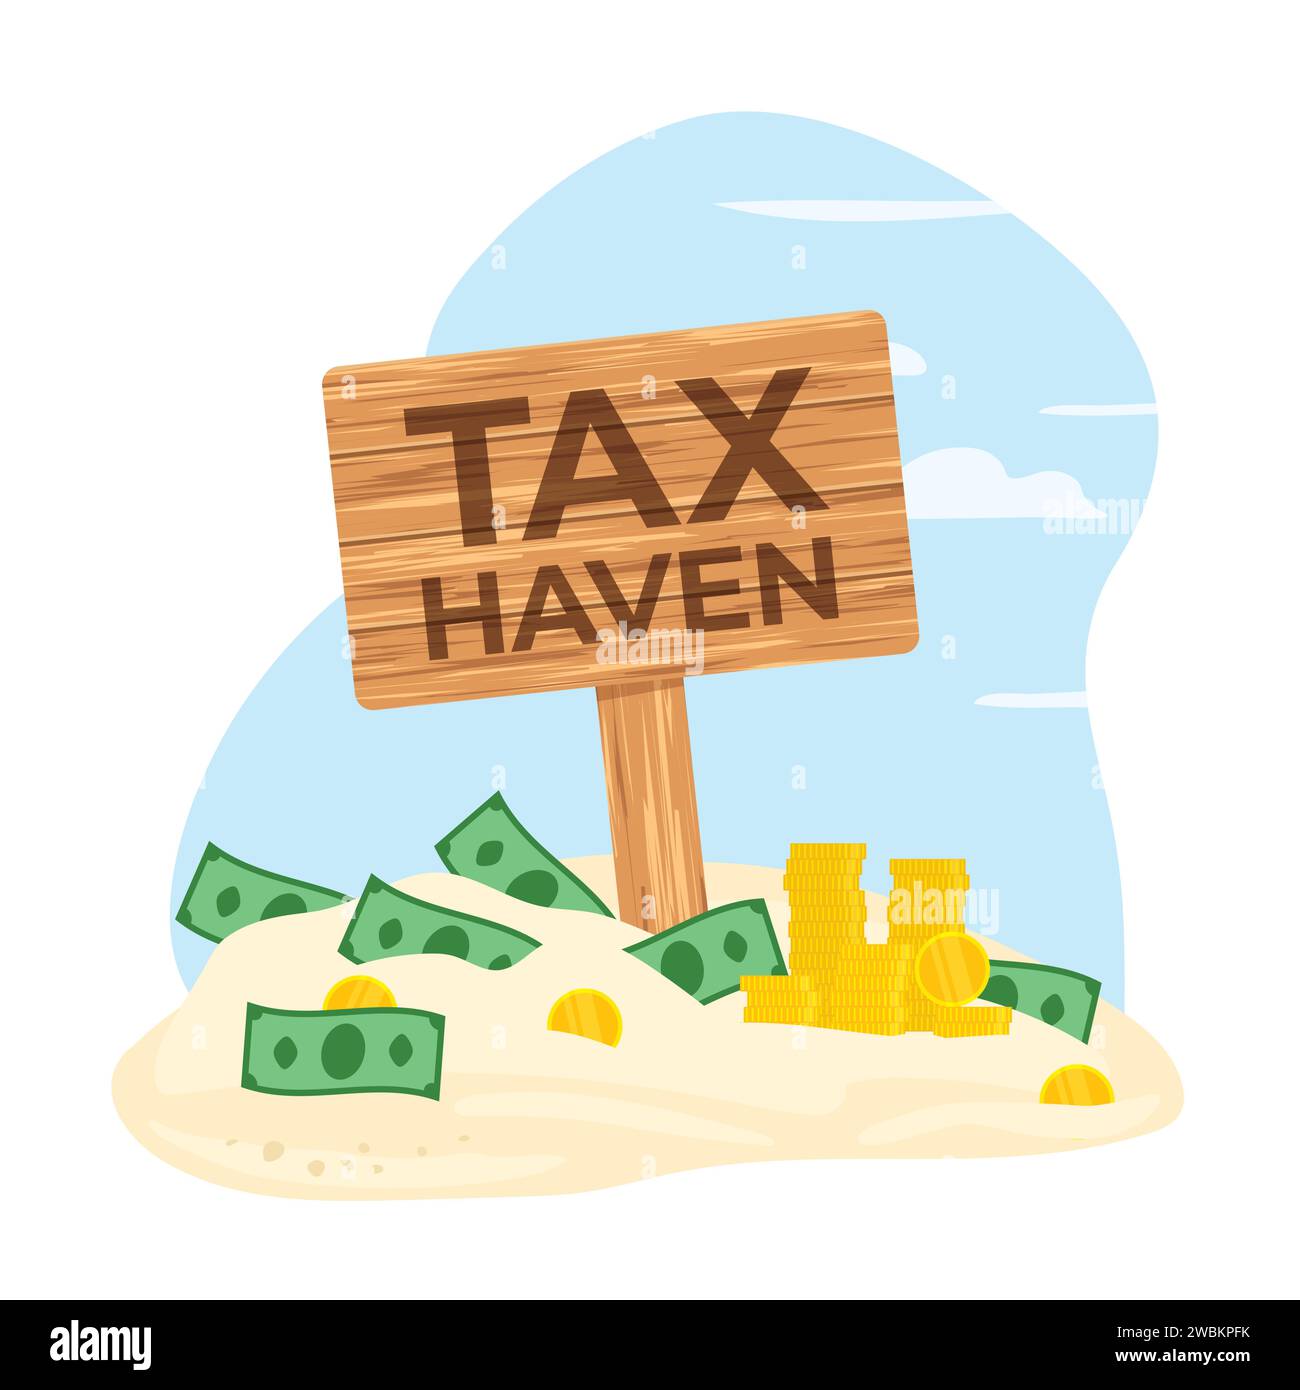 tax haven; fiscal paradise concept, wooden sign post on sandy beach and stack of coins and banknotes- vector illustration Stock Vector